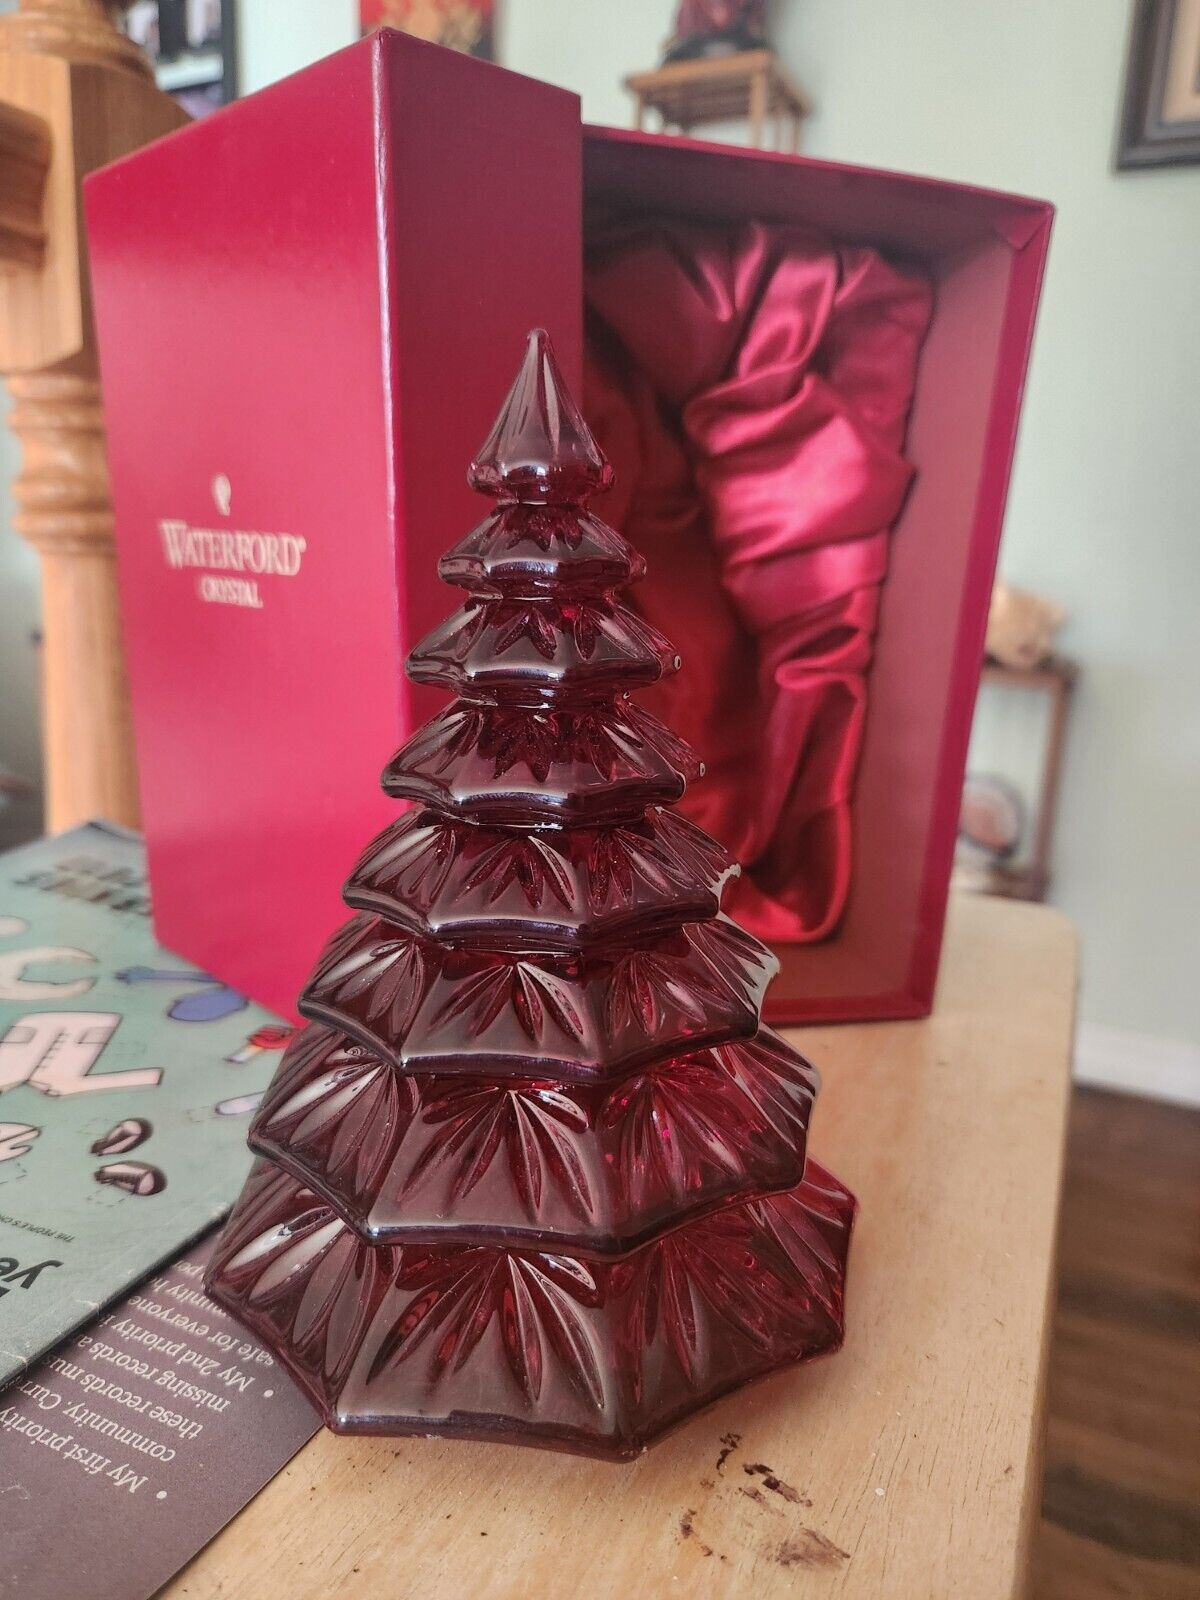 Waterford Original Lead Crystal Red Sculpted Christmas/Evergreen Tree 6.5”tall